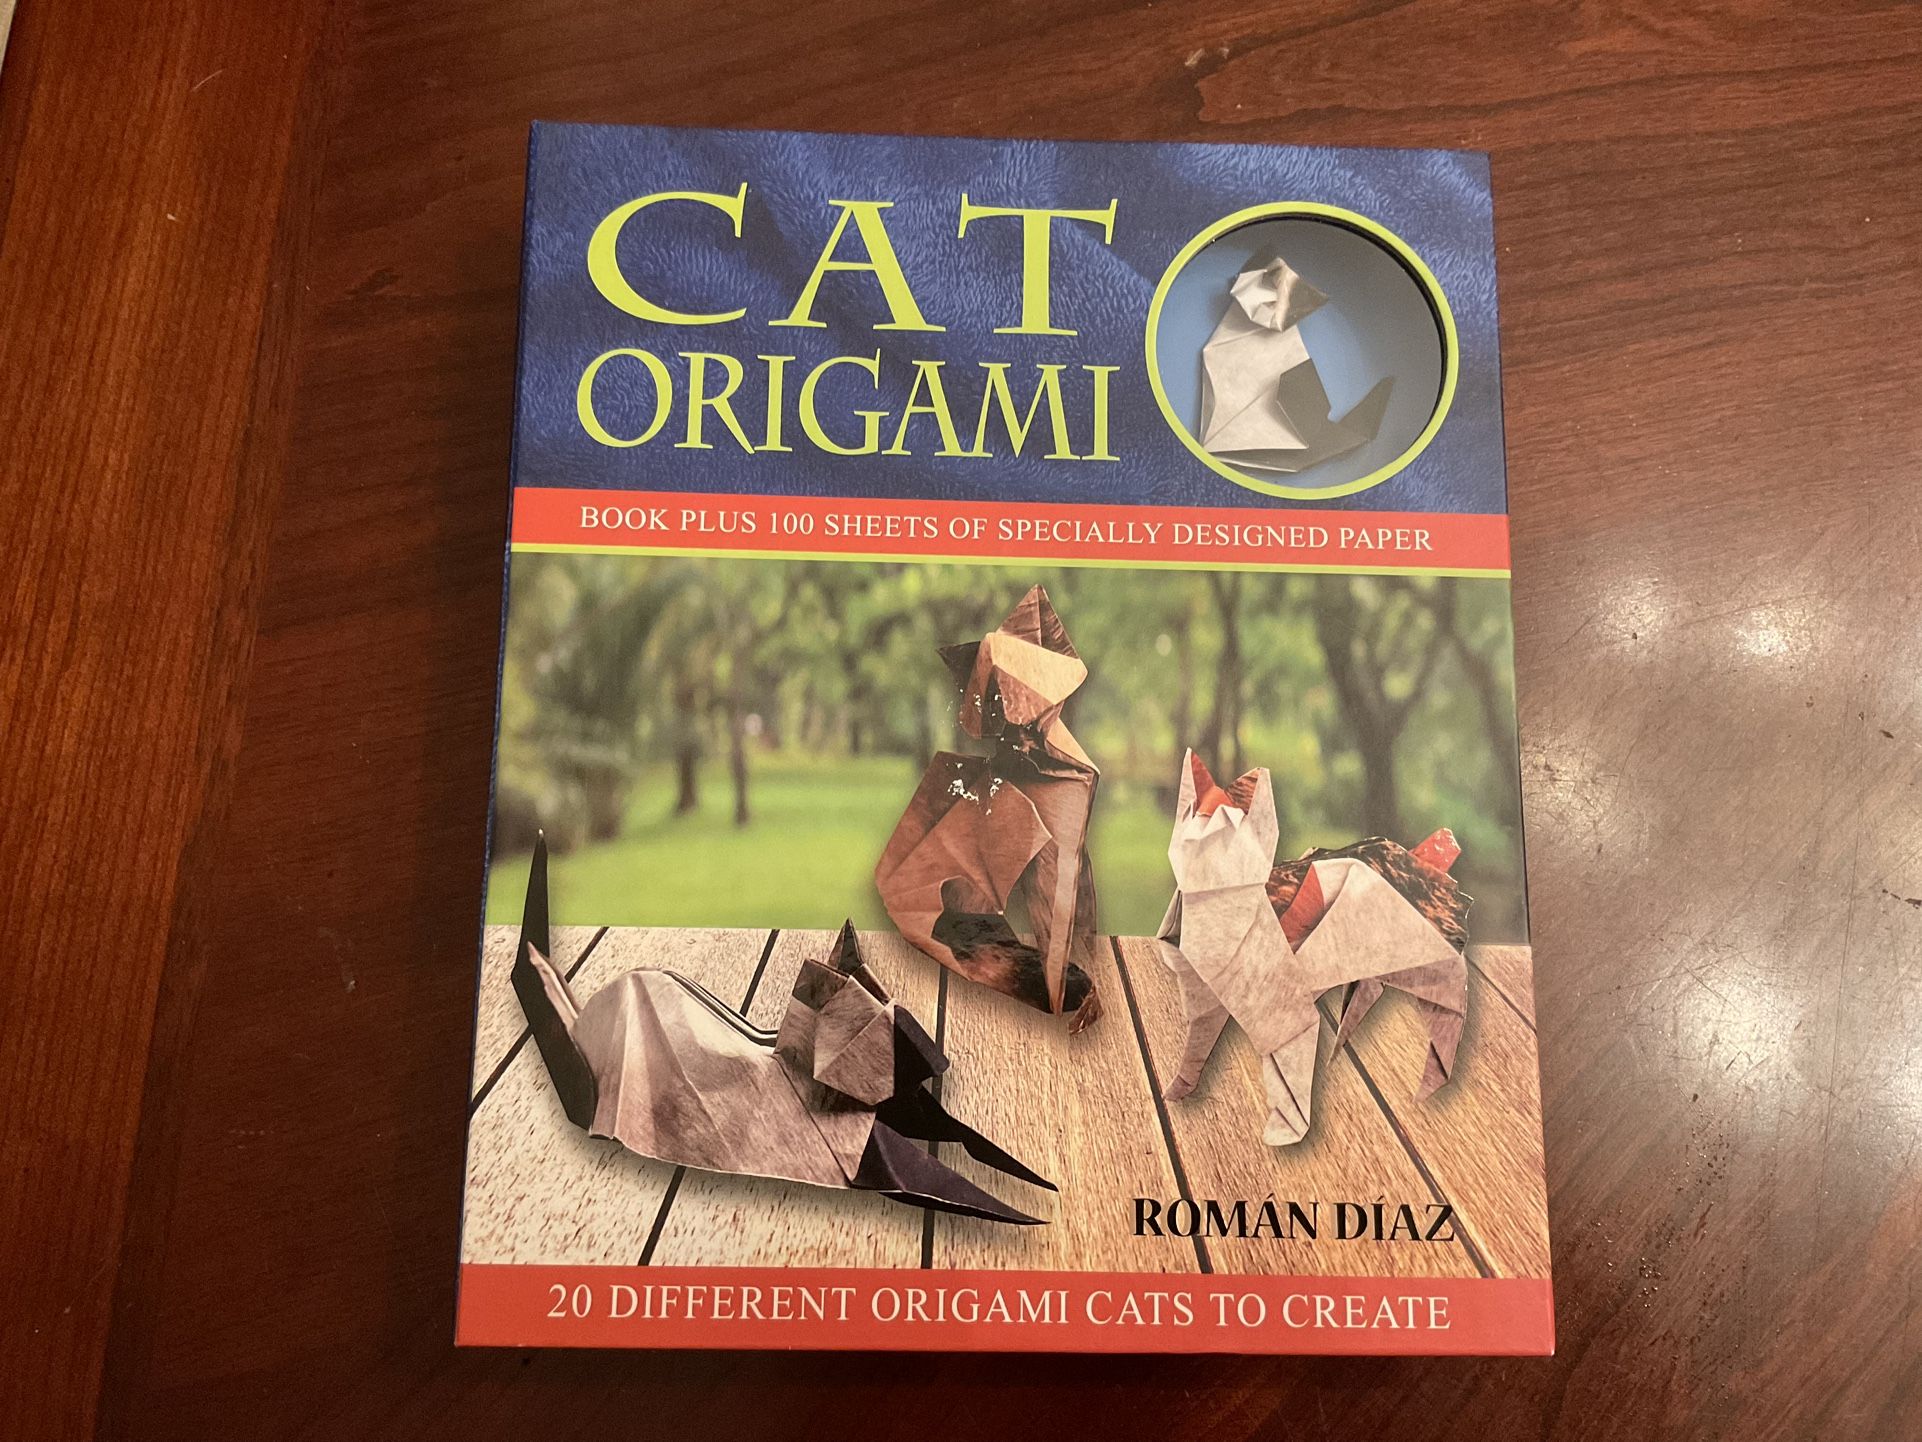 New Cat Origami Book by Roman Diaz/ 100 Sheets of Specially Designed Paper Kit